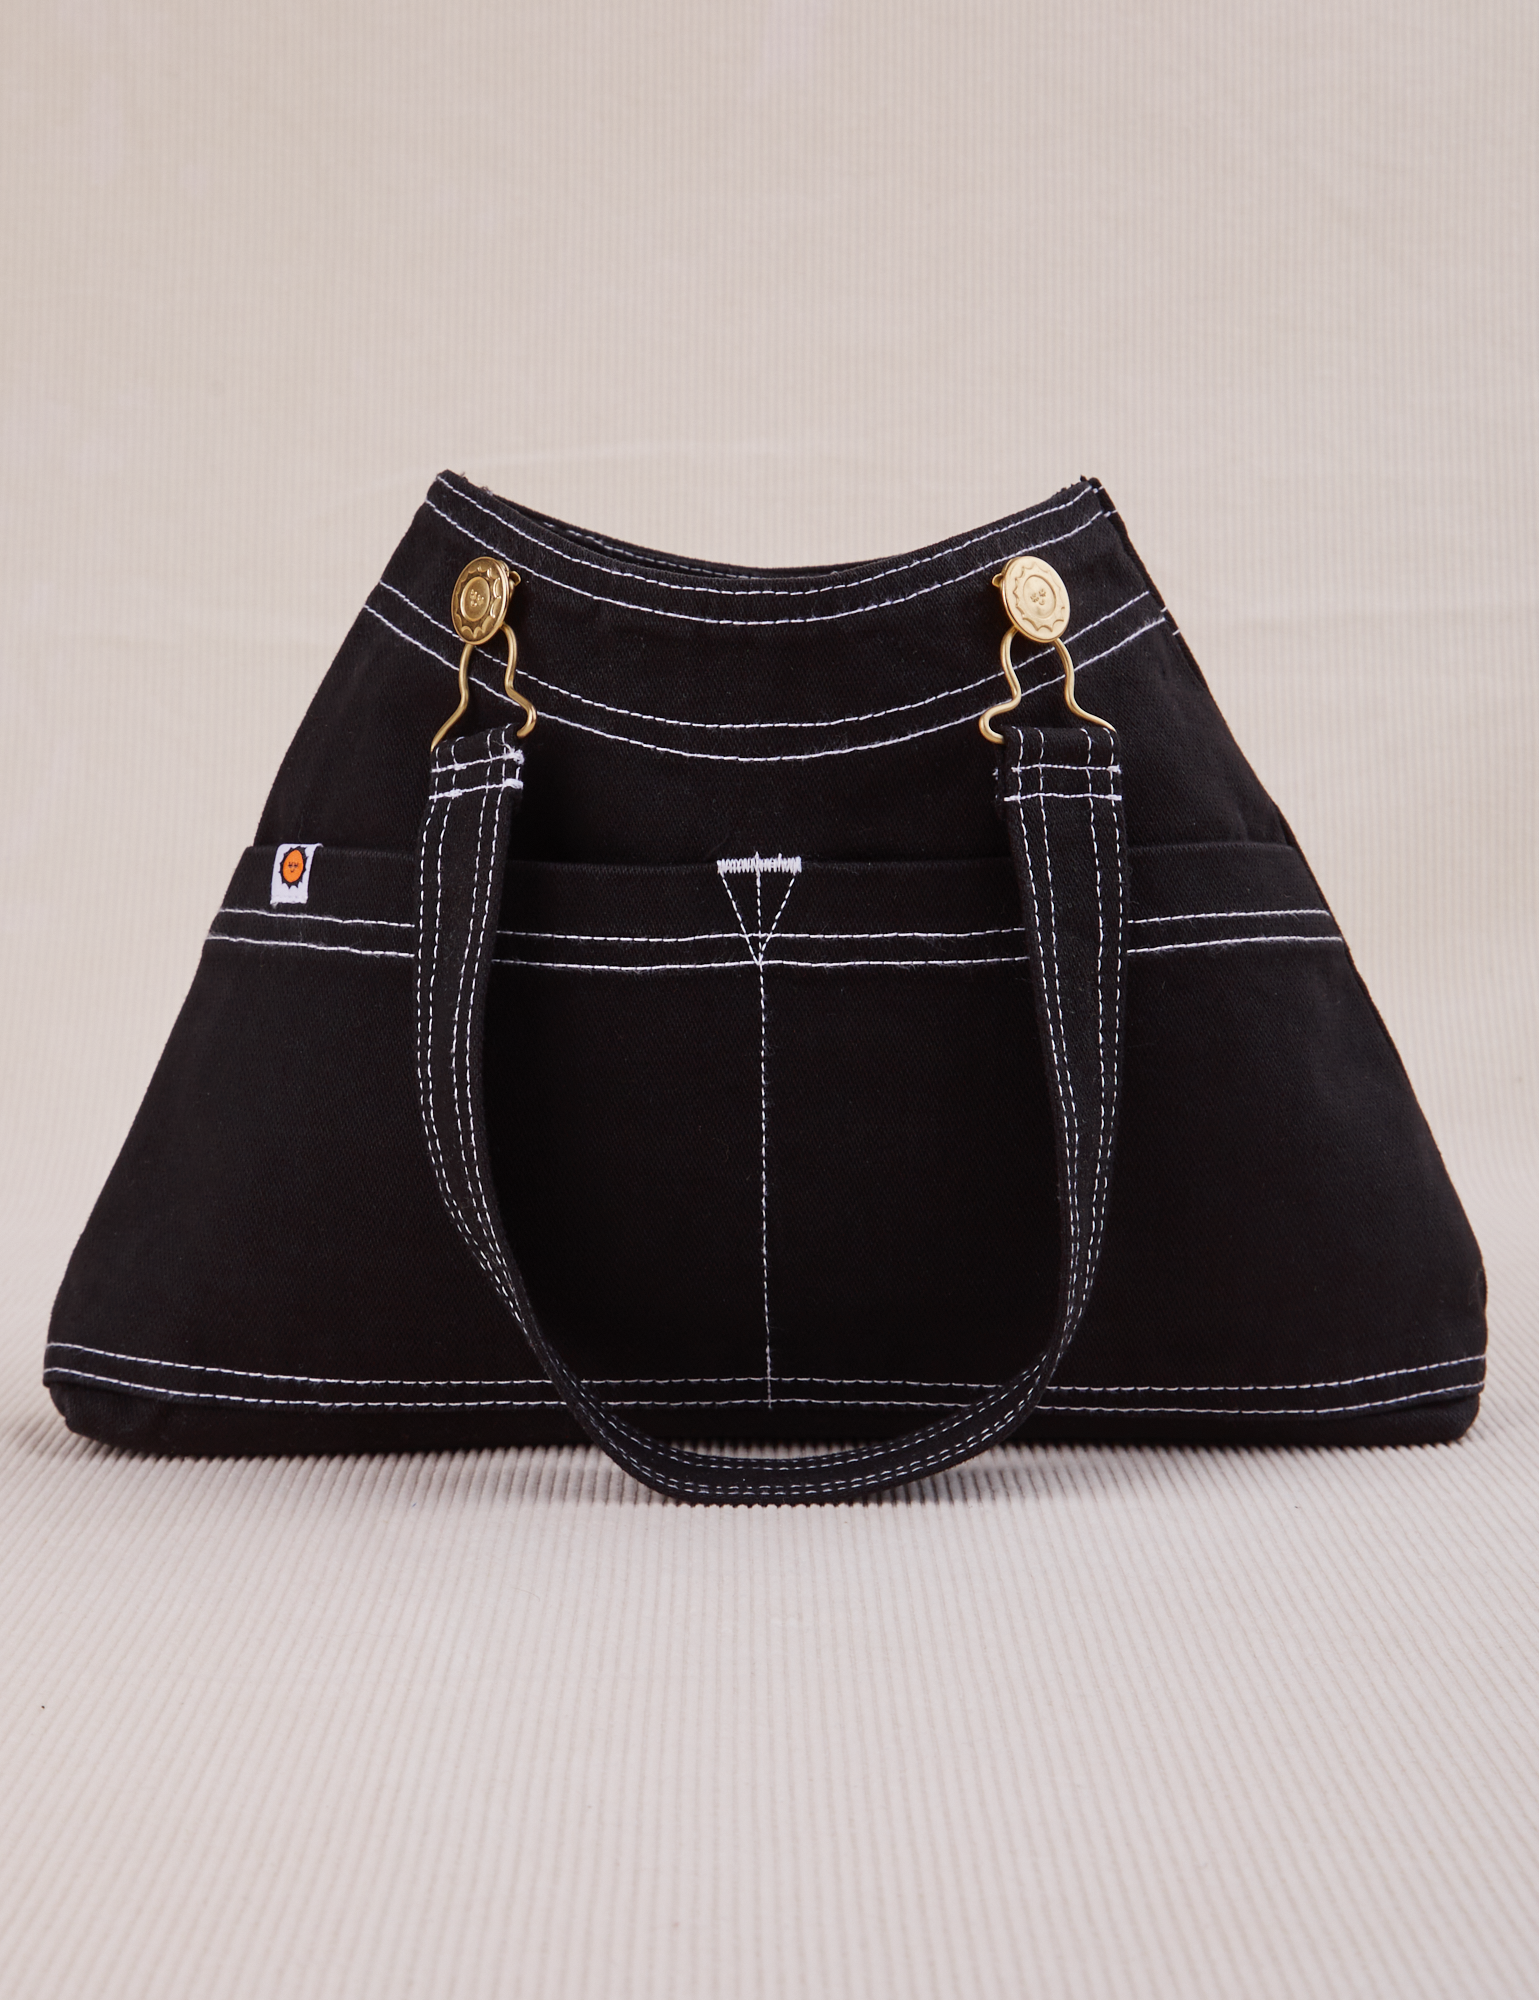 Overall Handbag in Black with handle strap hanging down front of bag.